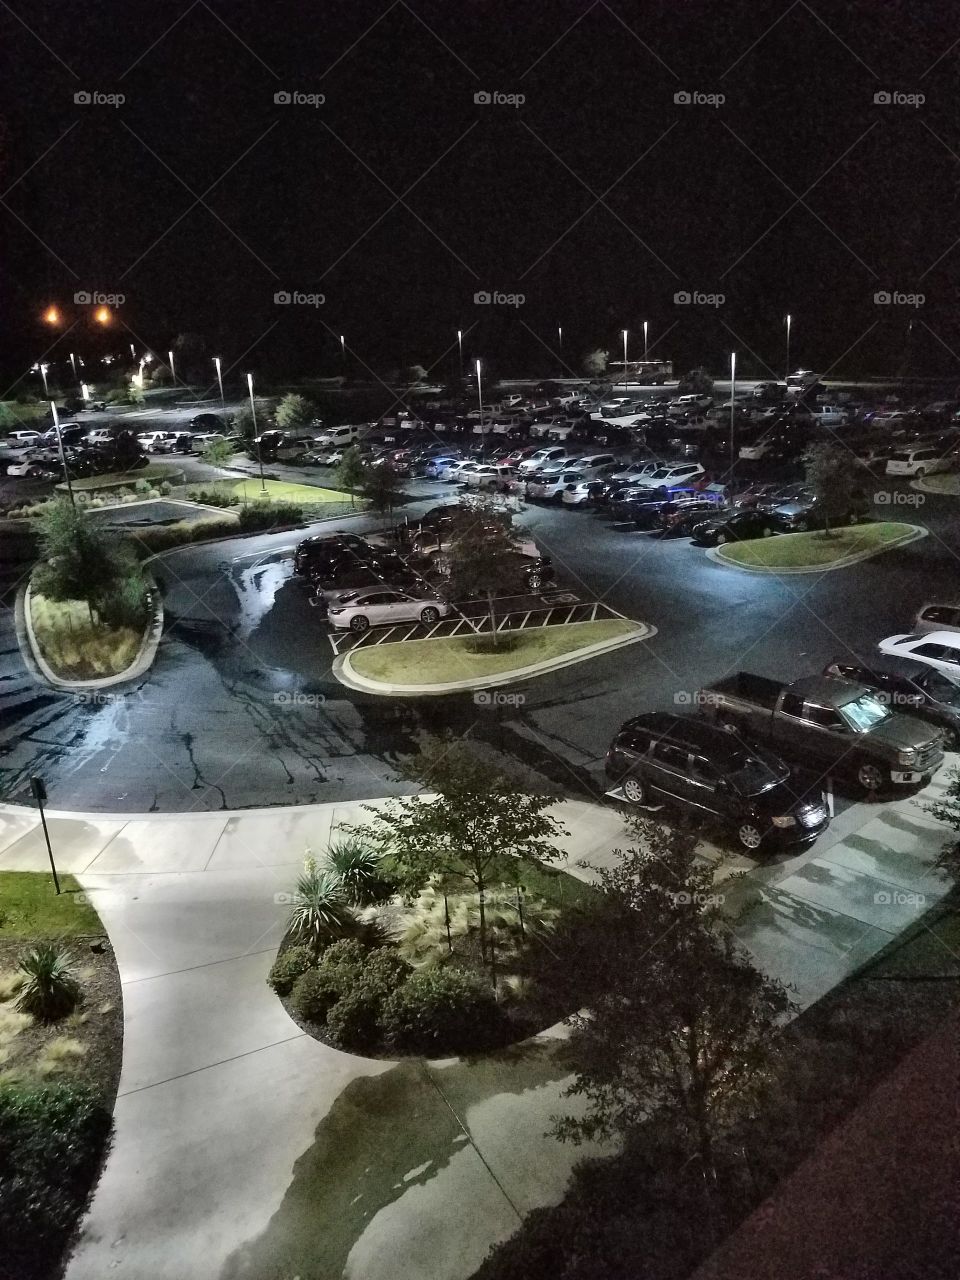 Looking out the window at Winstar Casino